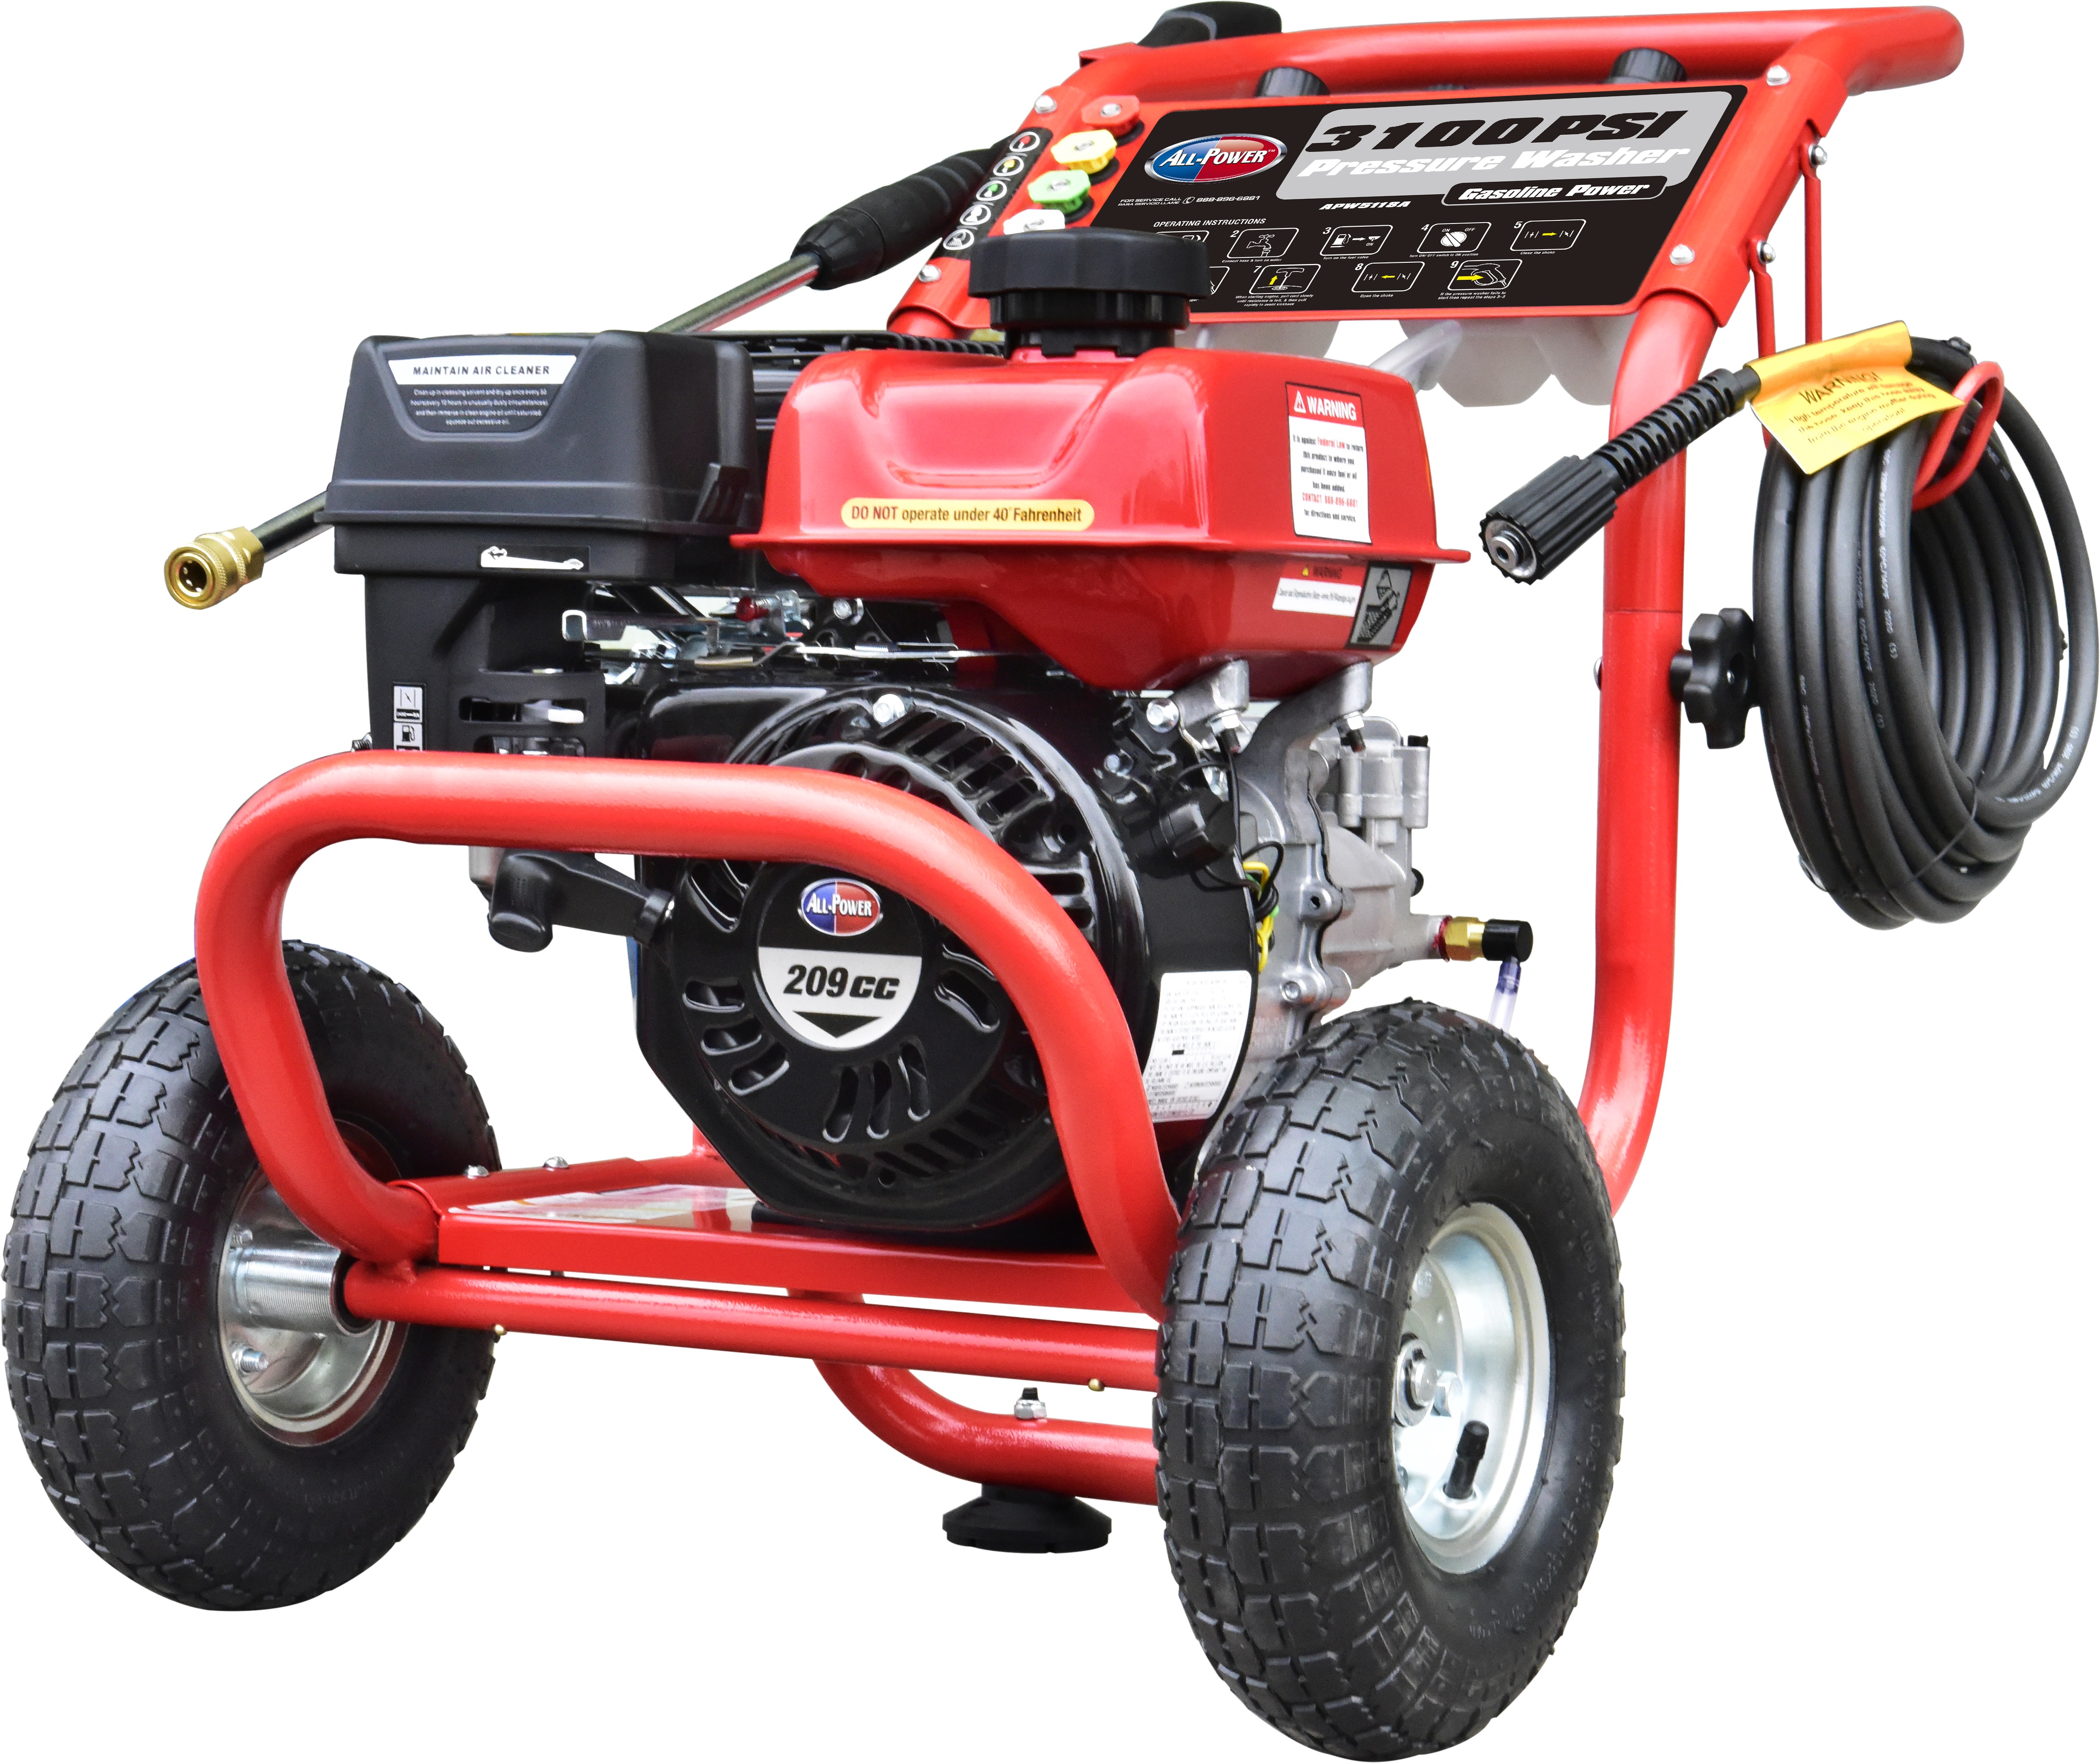 All Power America 3100 PSI, 2.6 GPM Gas Pressure Washer w/ 30 ft High Pressure Hose, C.A.R.B. Compliant, APW5118A - image 3 of 6